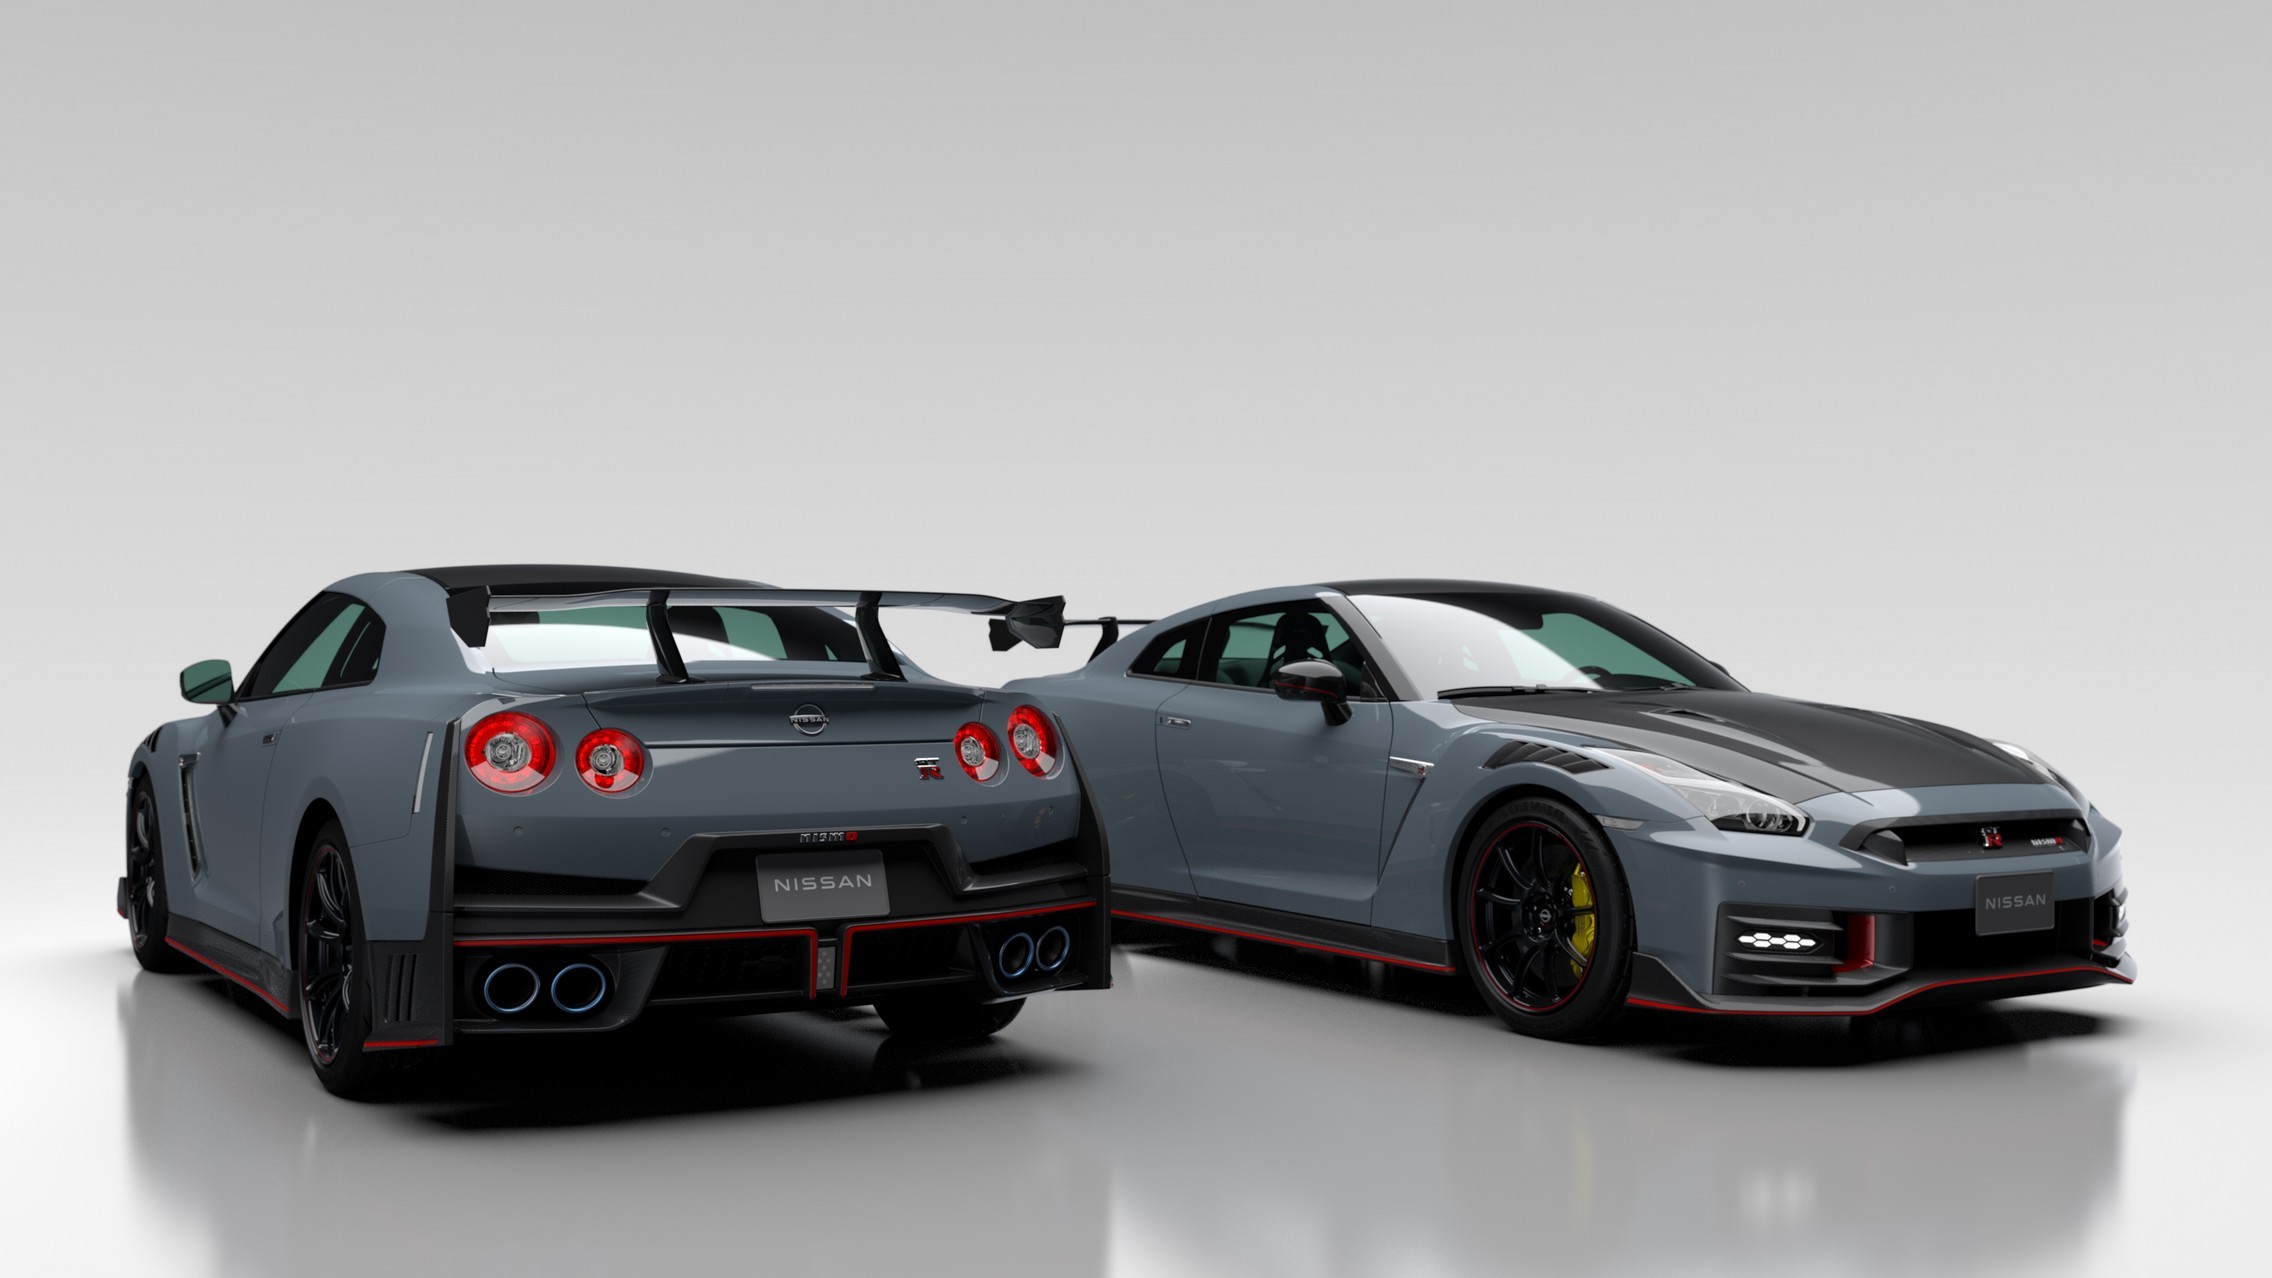 Pack of Digital R36 Nissan GT-R Supercars Dwell Around Flaunting